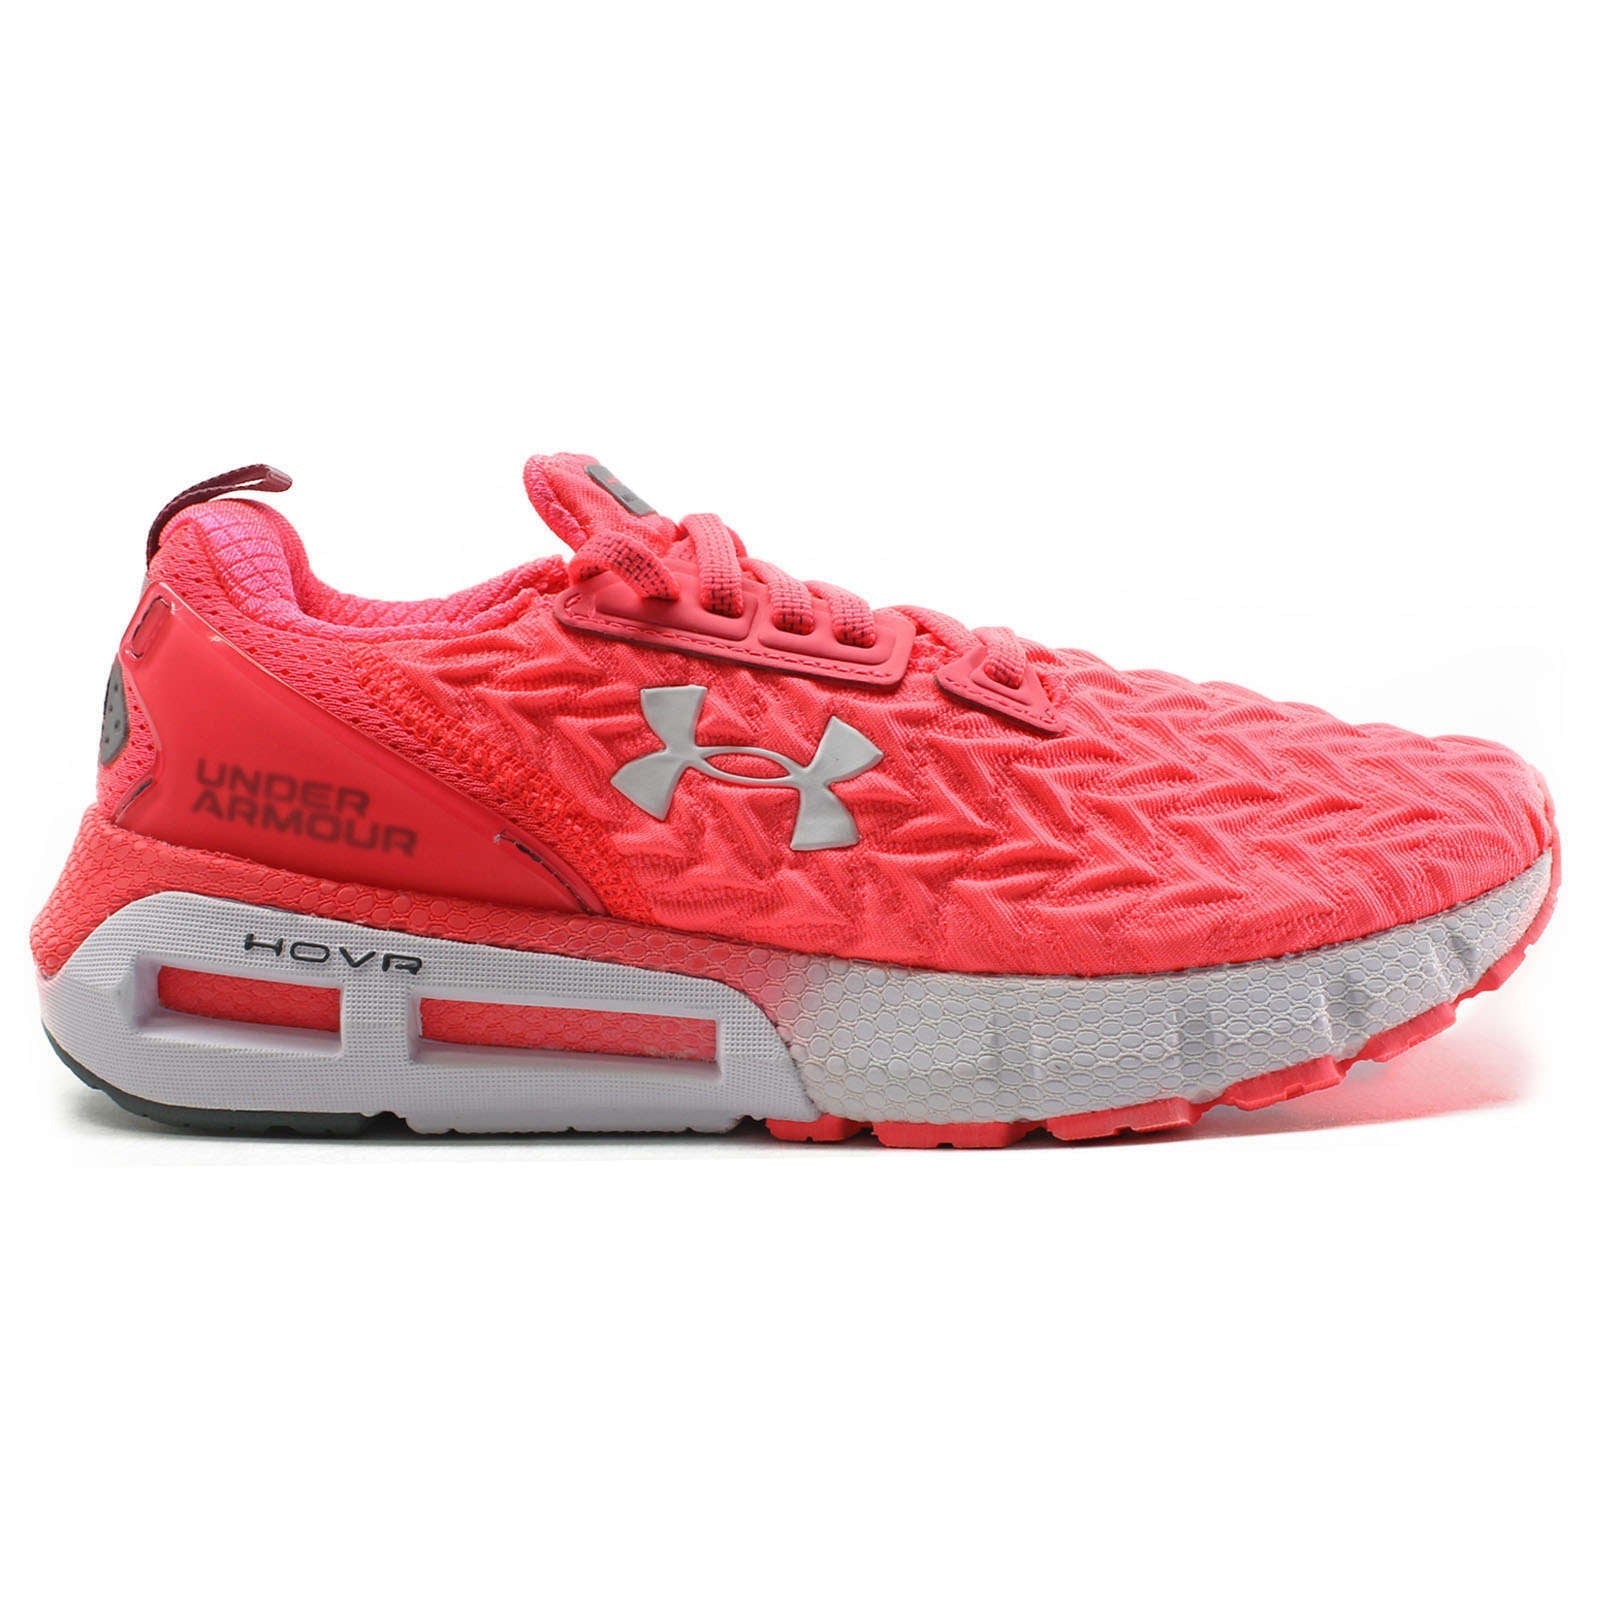 Under Armour HOVR Mega 2 Clone Synthetic Textile Women's Low-Top Sneakers#color_pink white